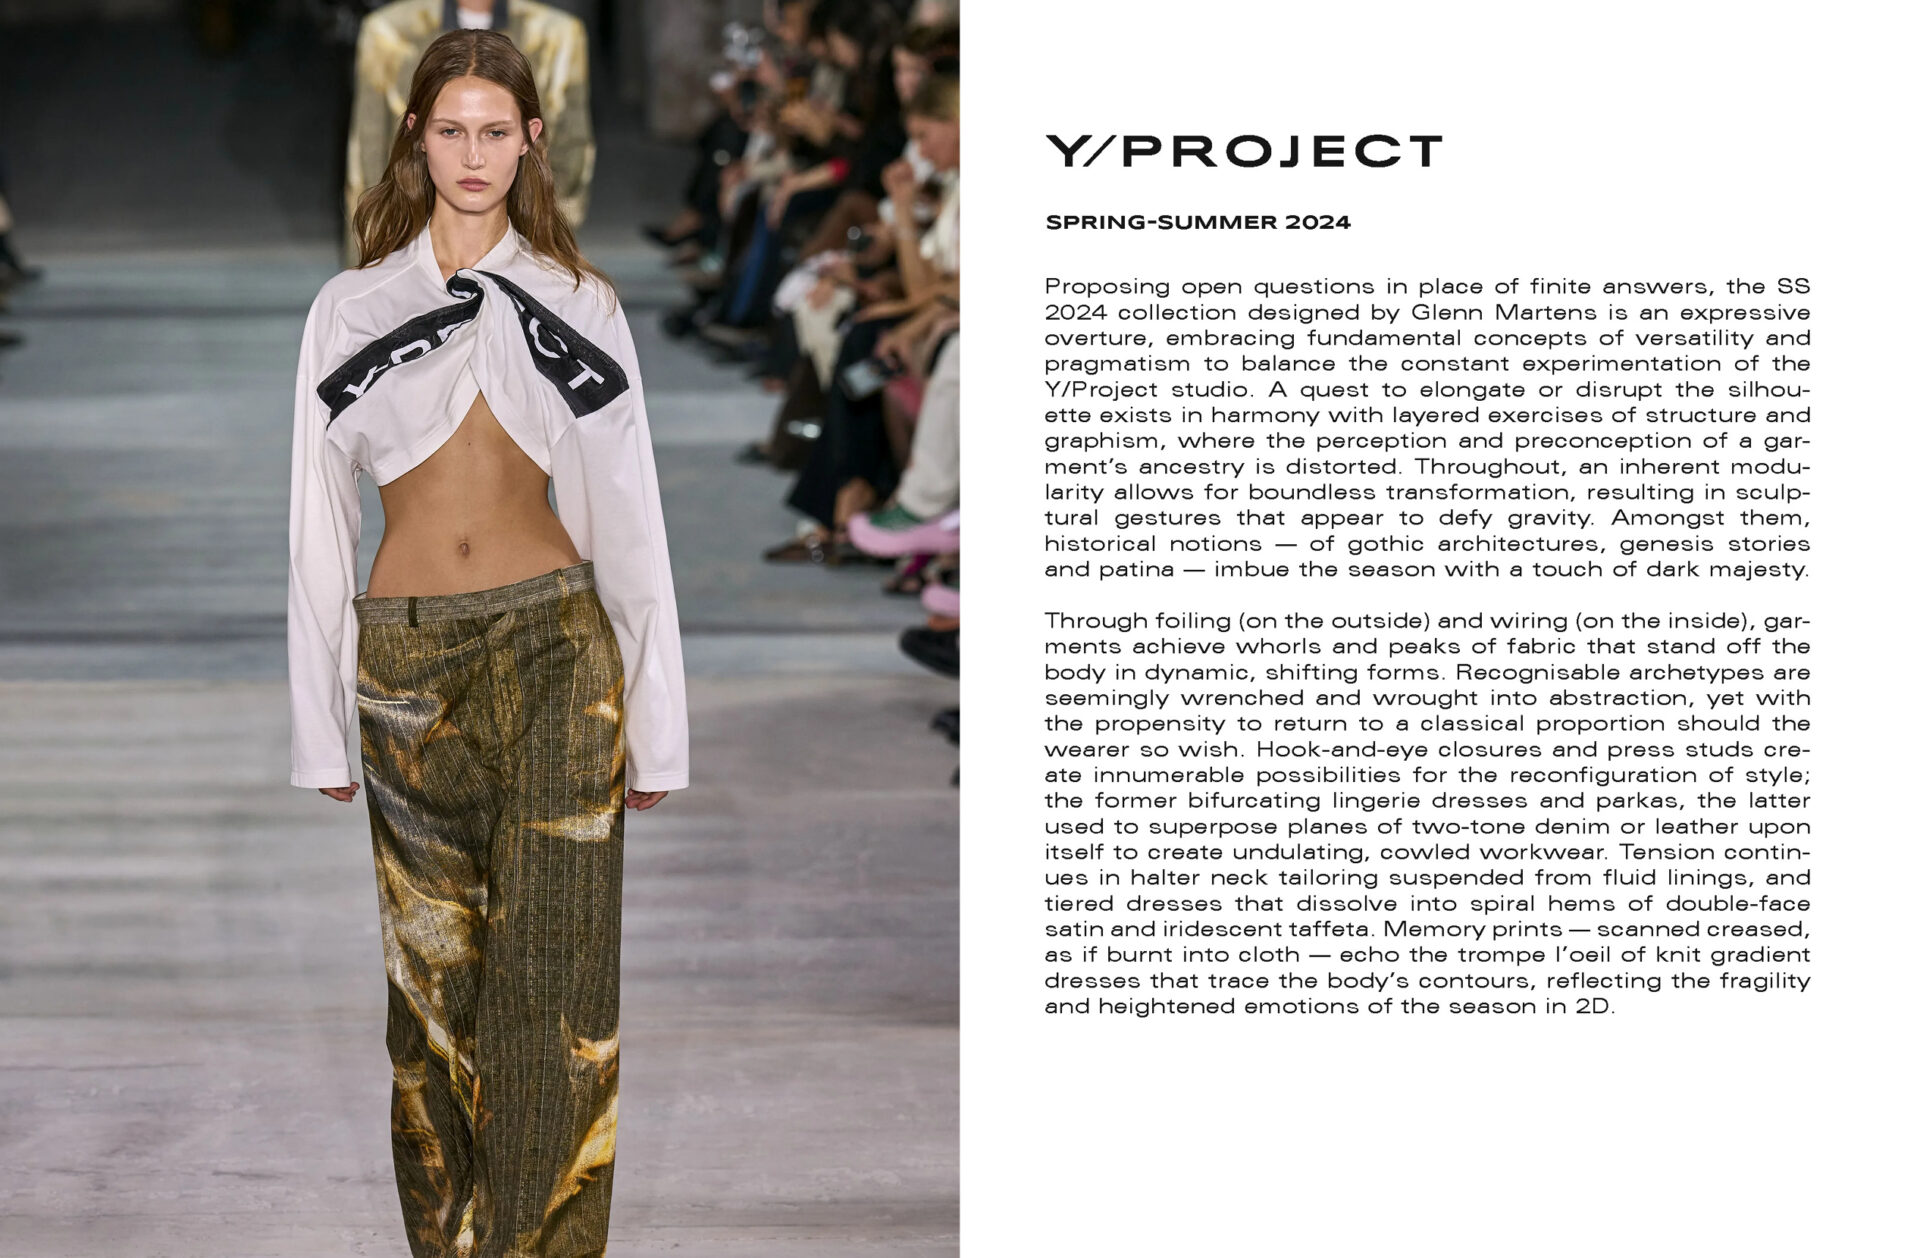 Dan Thawley | COLLECTION STATEMENTS | Y/Project Spring/Summer 2024 | 2